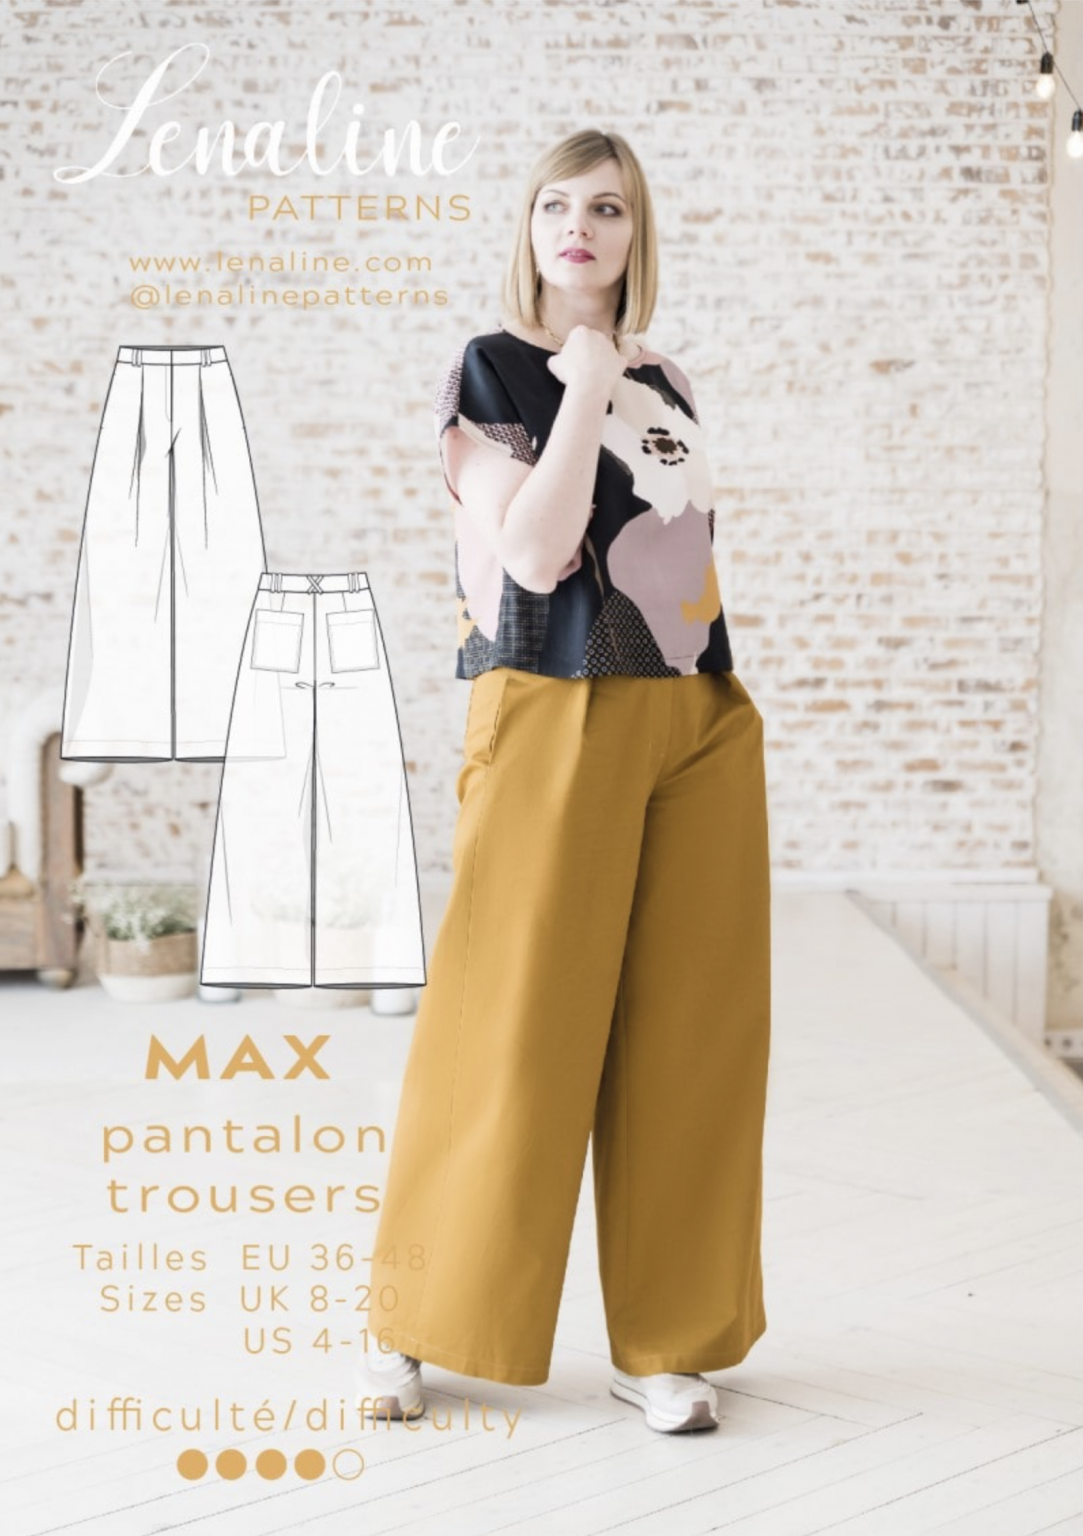 Lenaline Patterns Max Trousers - The Fold Line